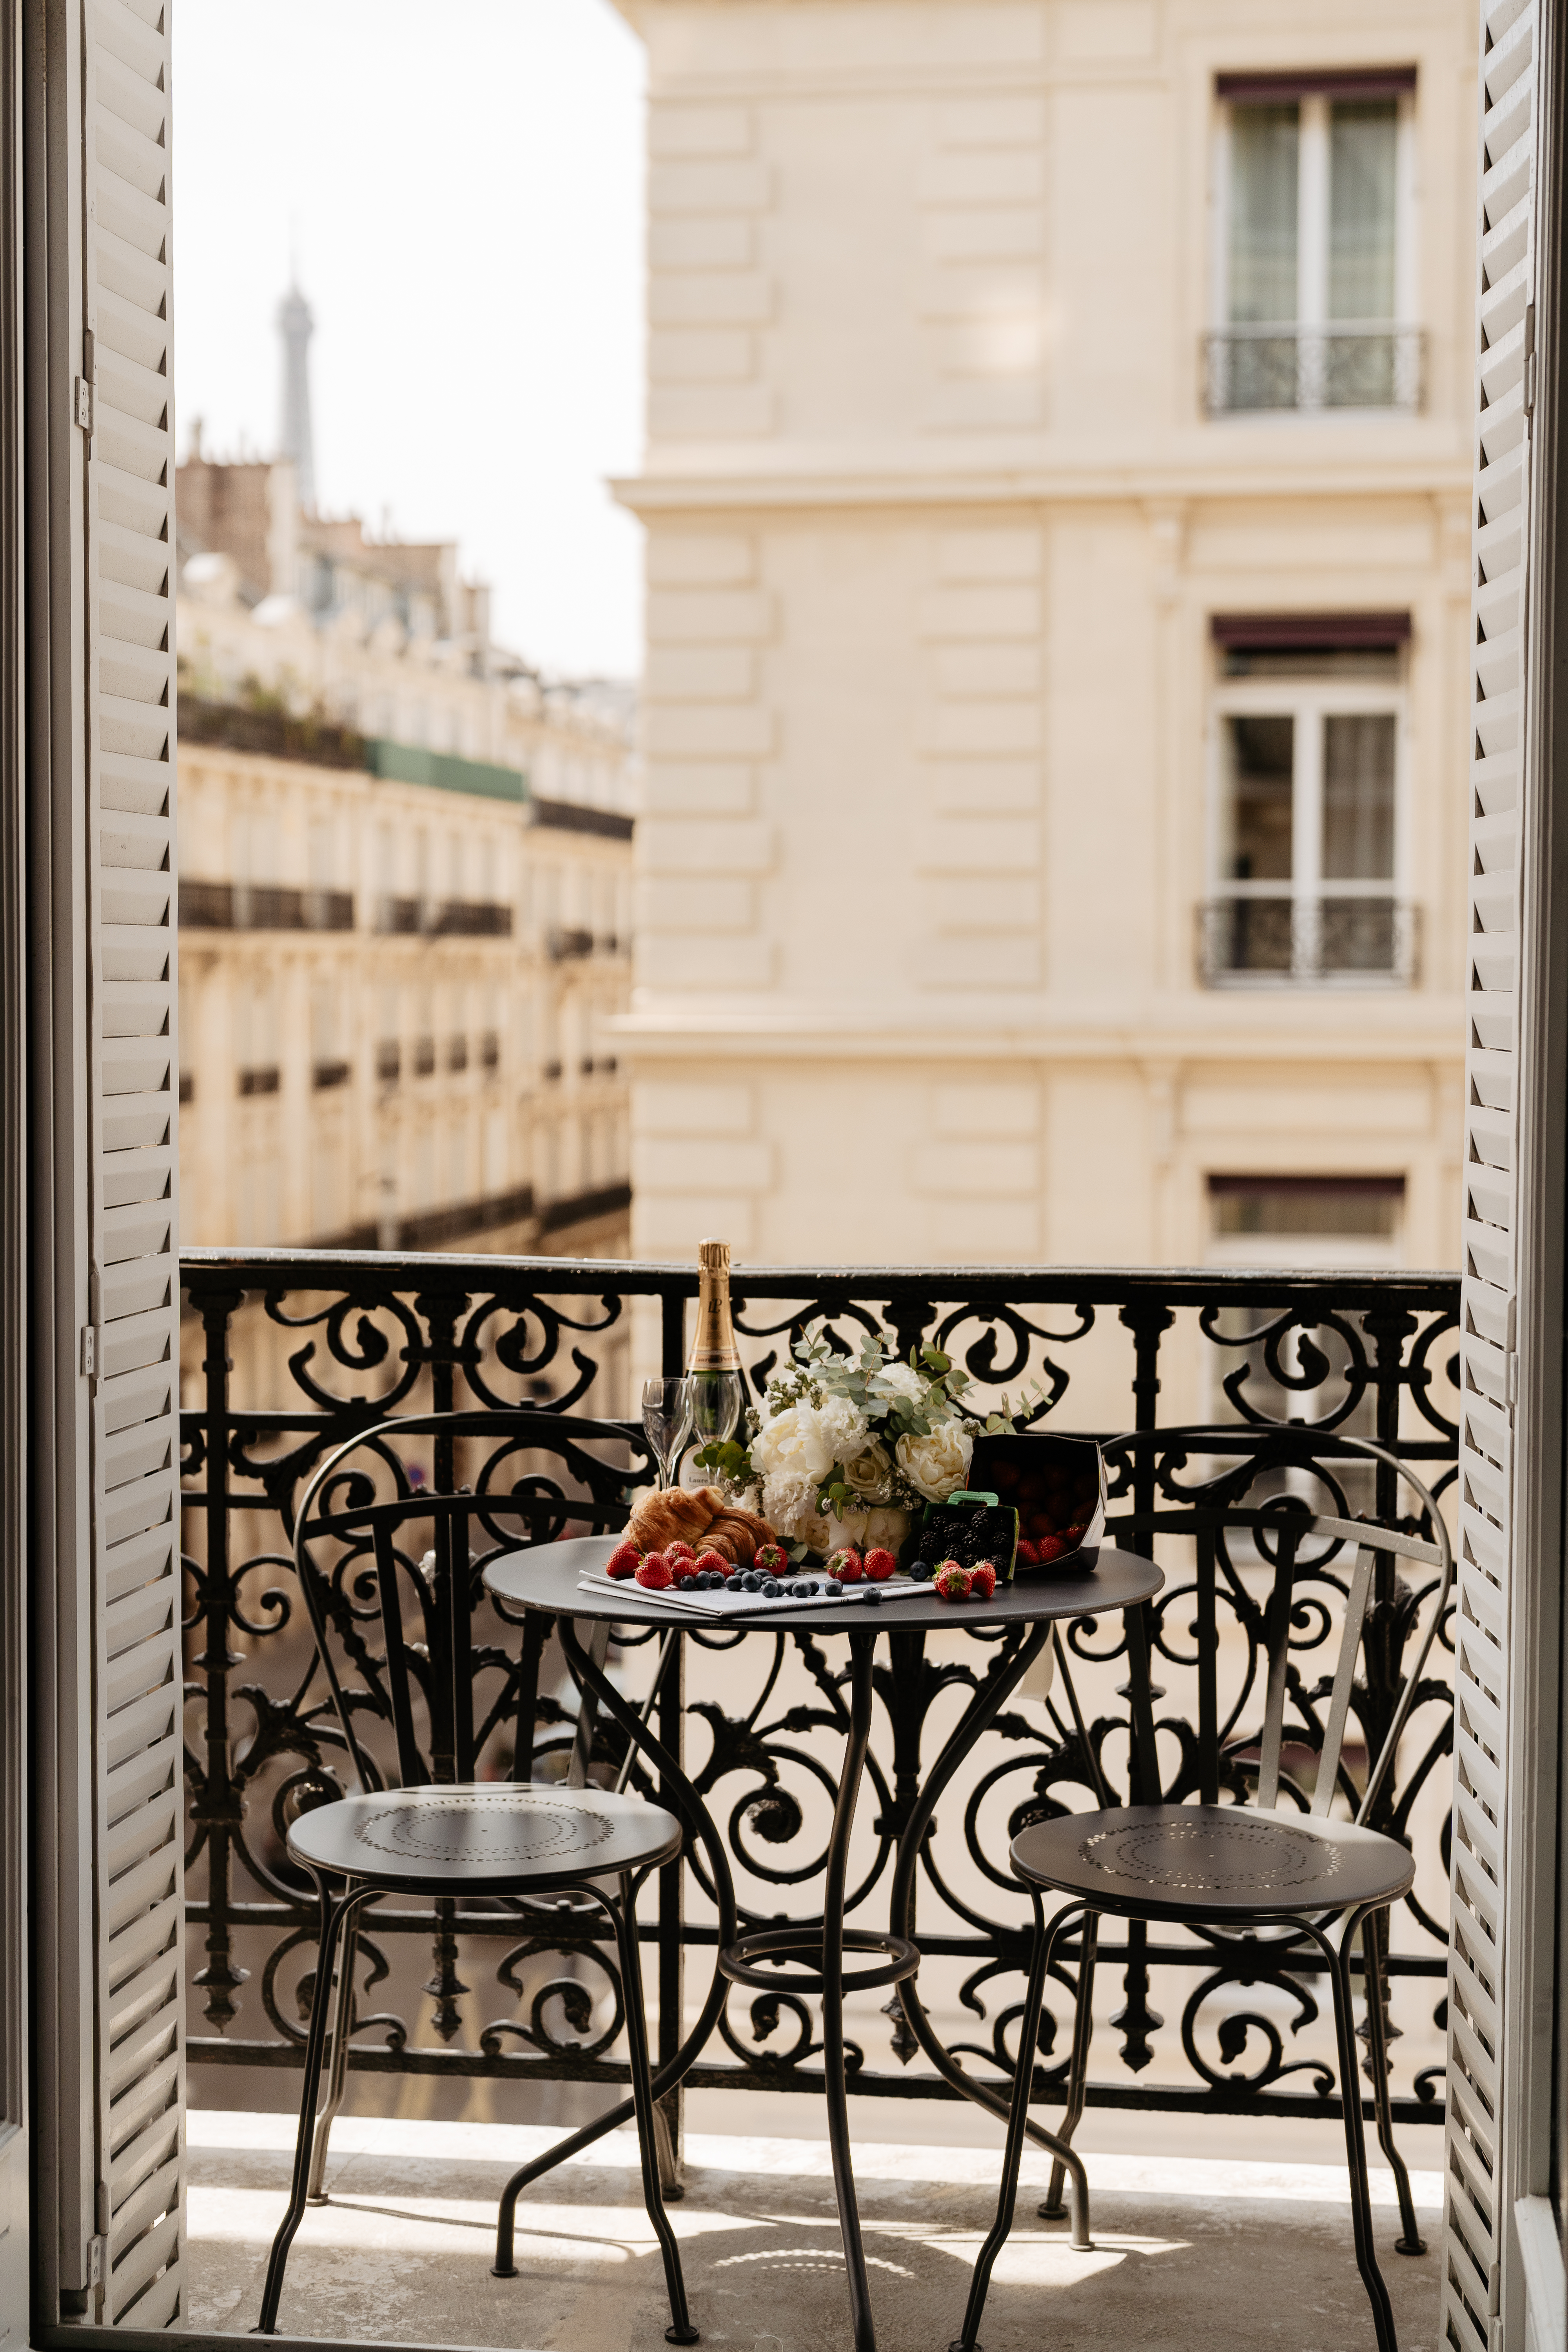 Couple full-day Pre-wedding Photoshoot in Paris hotel balcony with wine and fruits